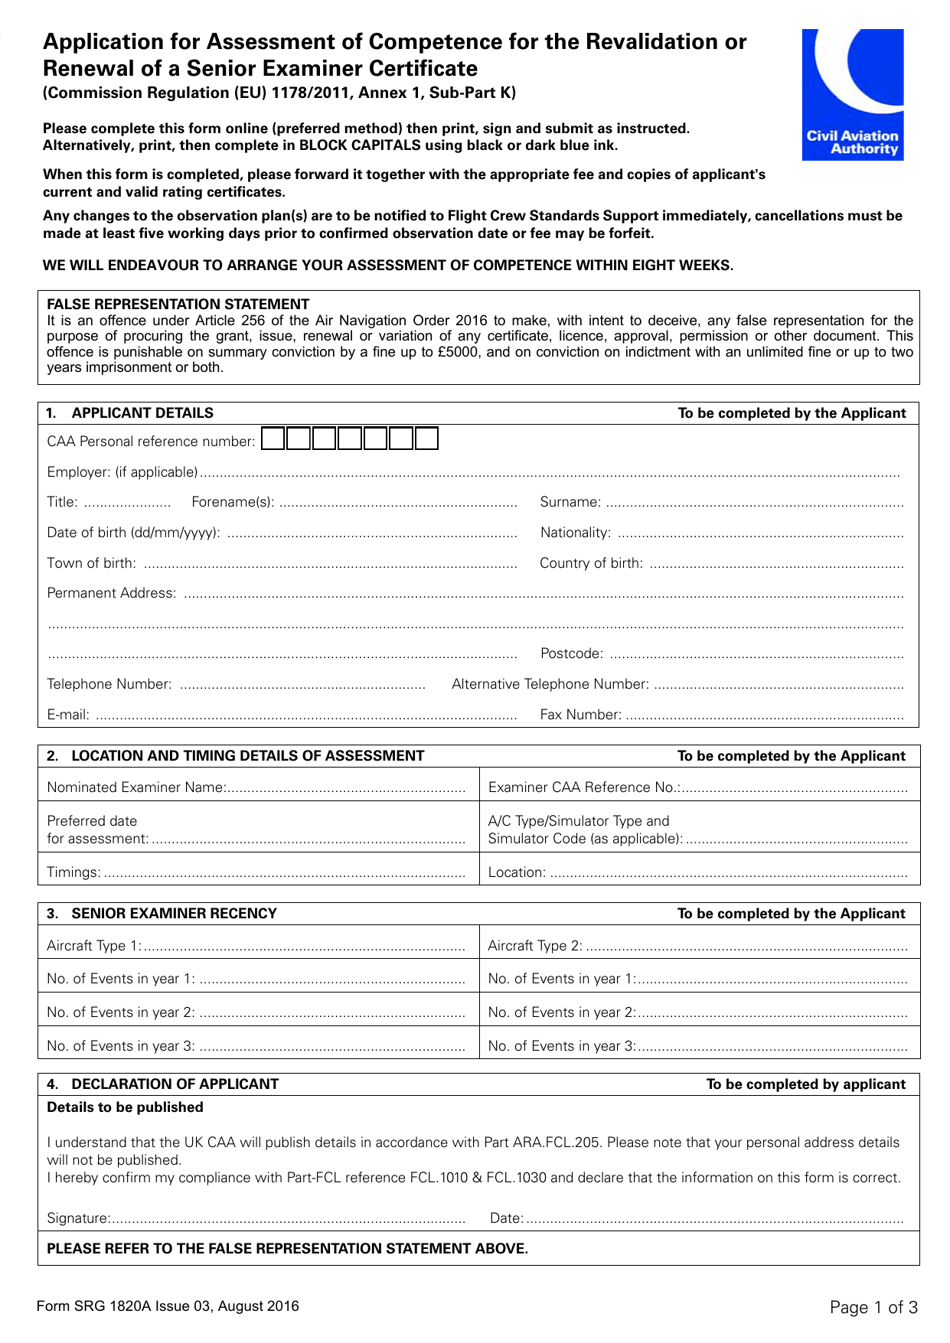 Form SRG1820A Application for Assessment of Competence for the Revalidation or Renewal of a Senior Examiner Certificate - United Kingdom, Page 1